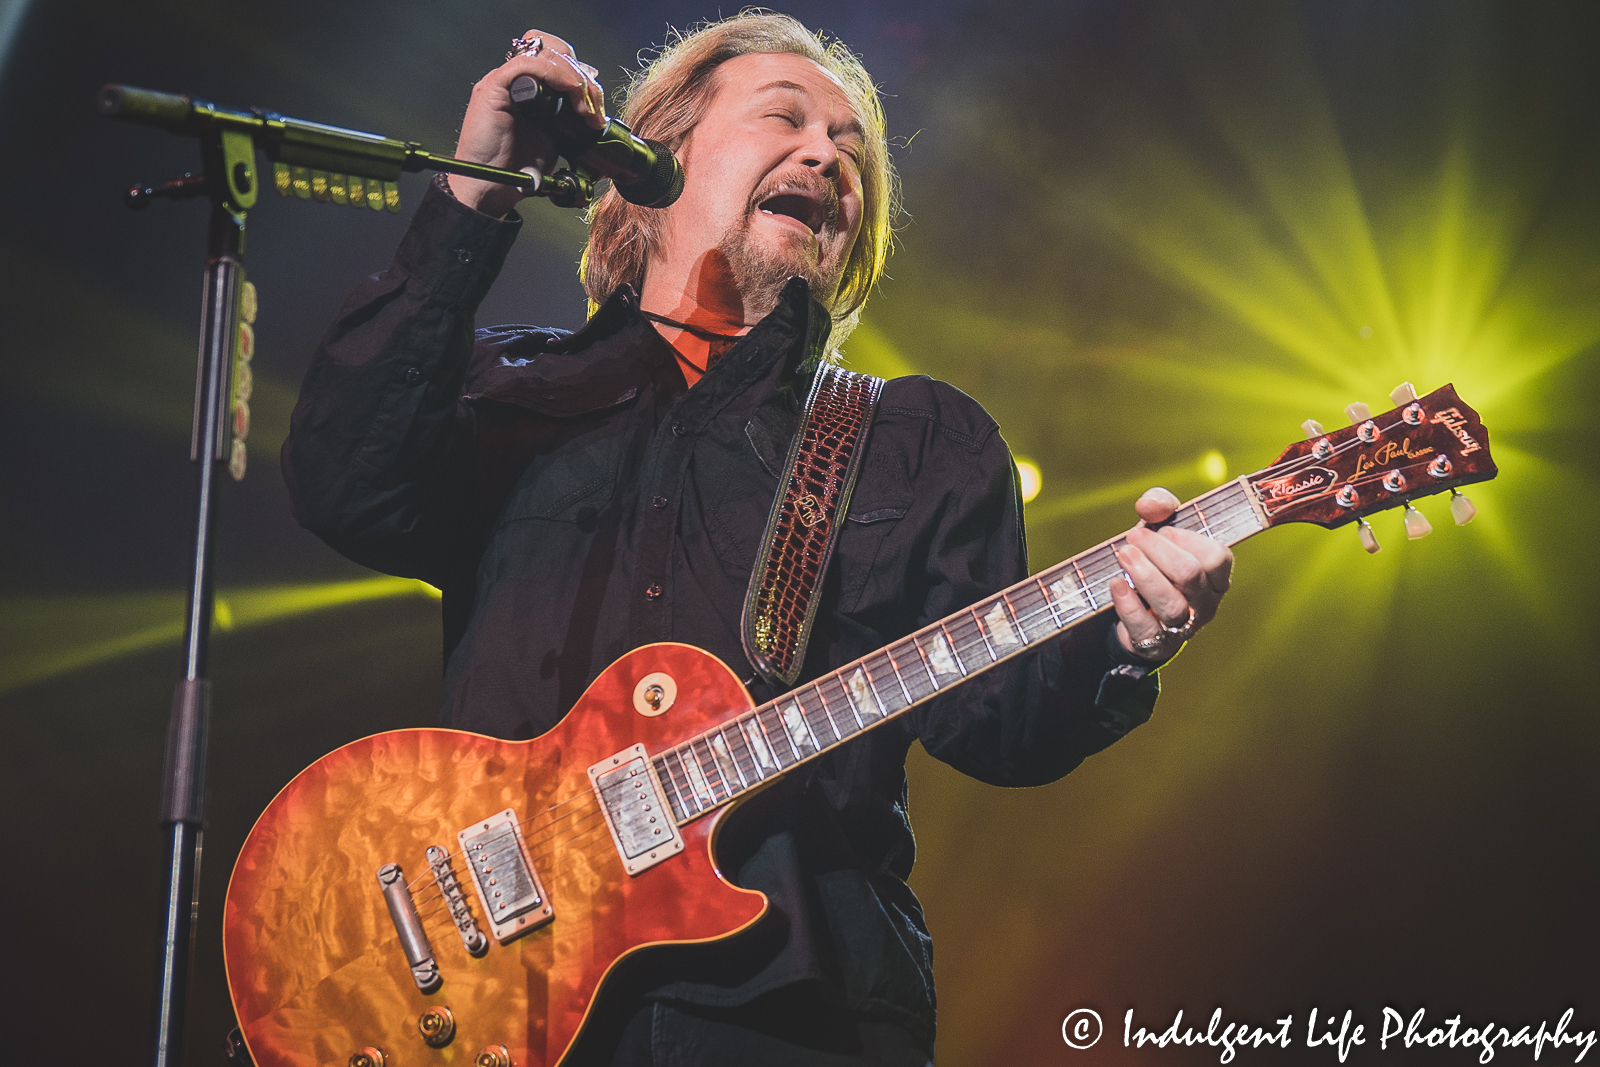 Belting out a big note is Travis Tritt as he performs "Put Some Drive in Your Country" for fans at Ameristar Casino Hotel Kansas City on December 3, 2021.